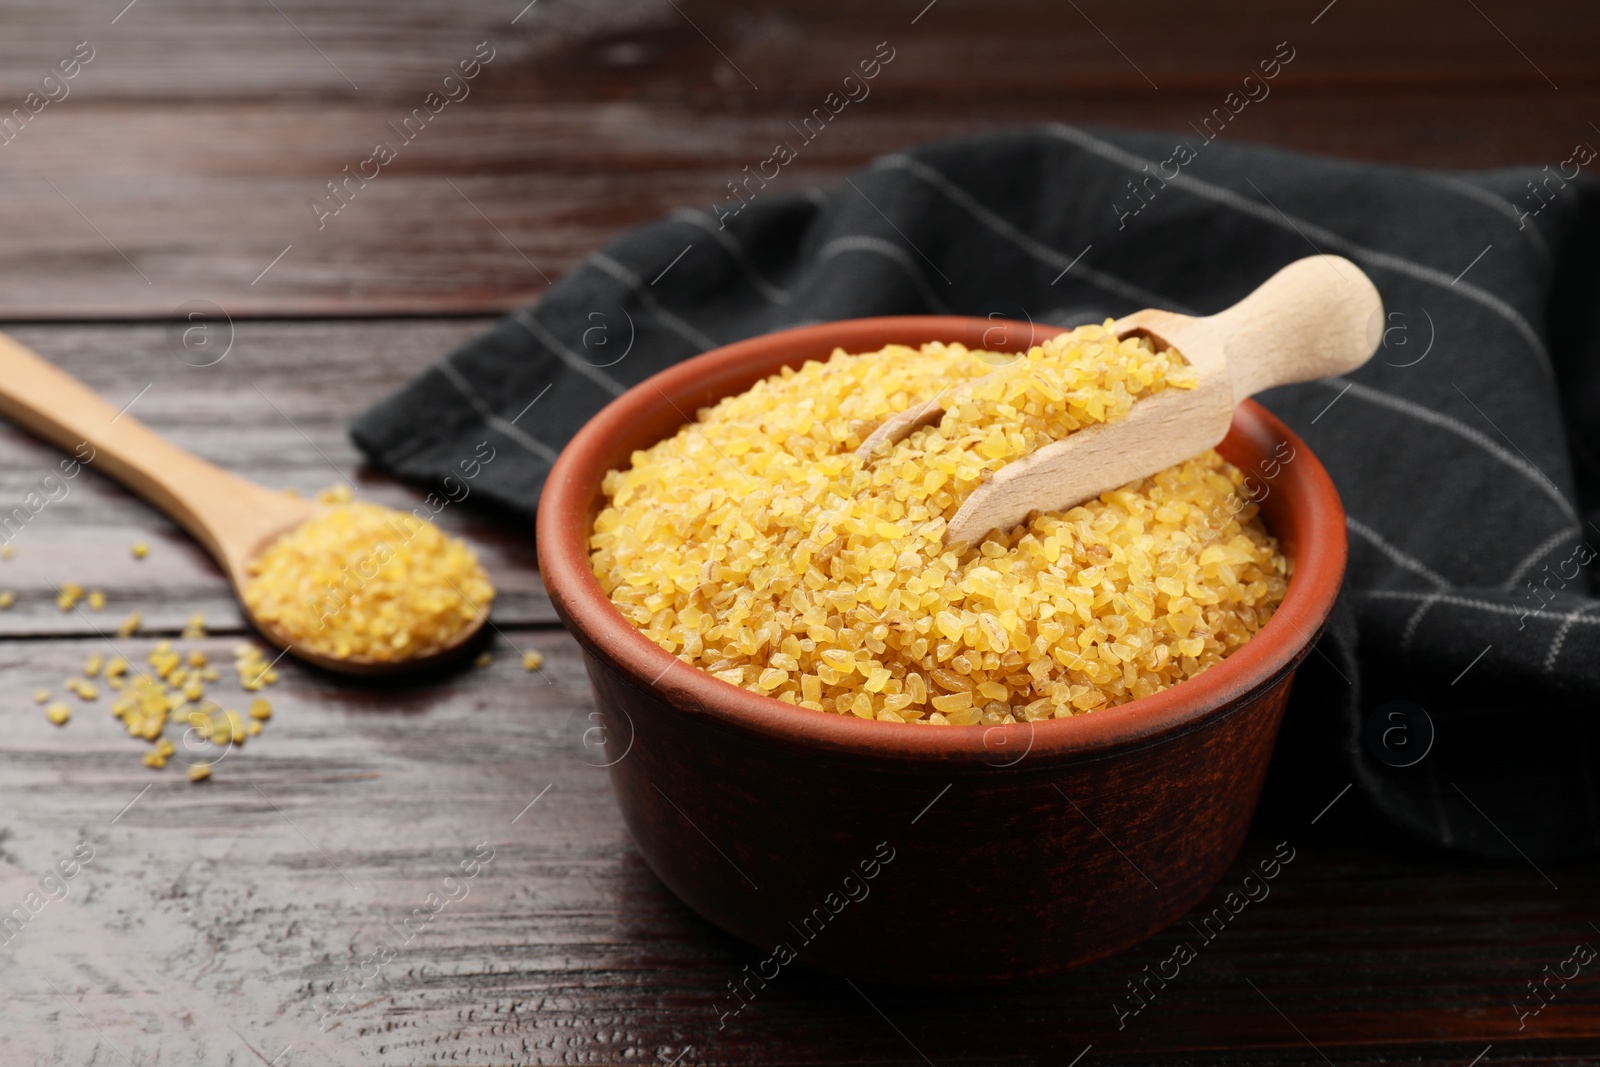 Photo of Bowl and spoon with raw bulgur on wooden table, closeup